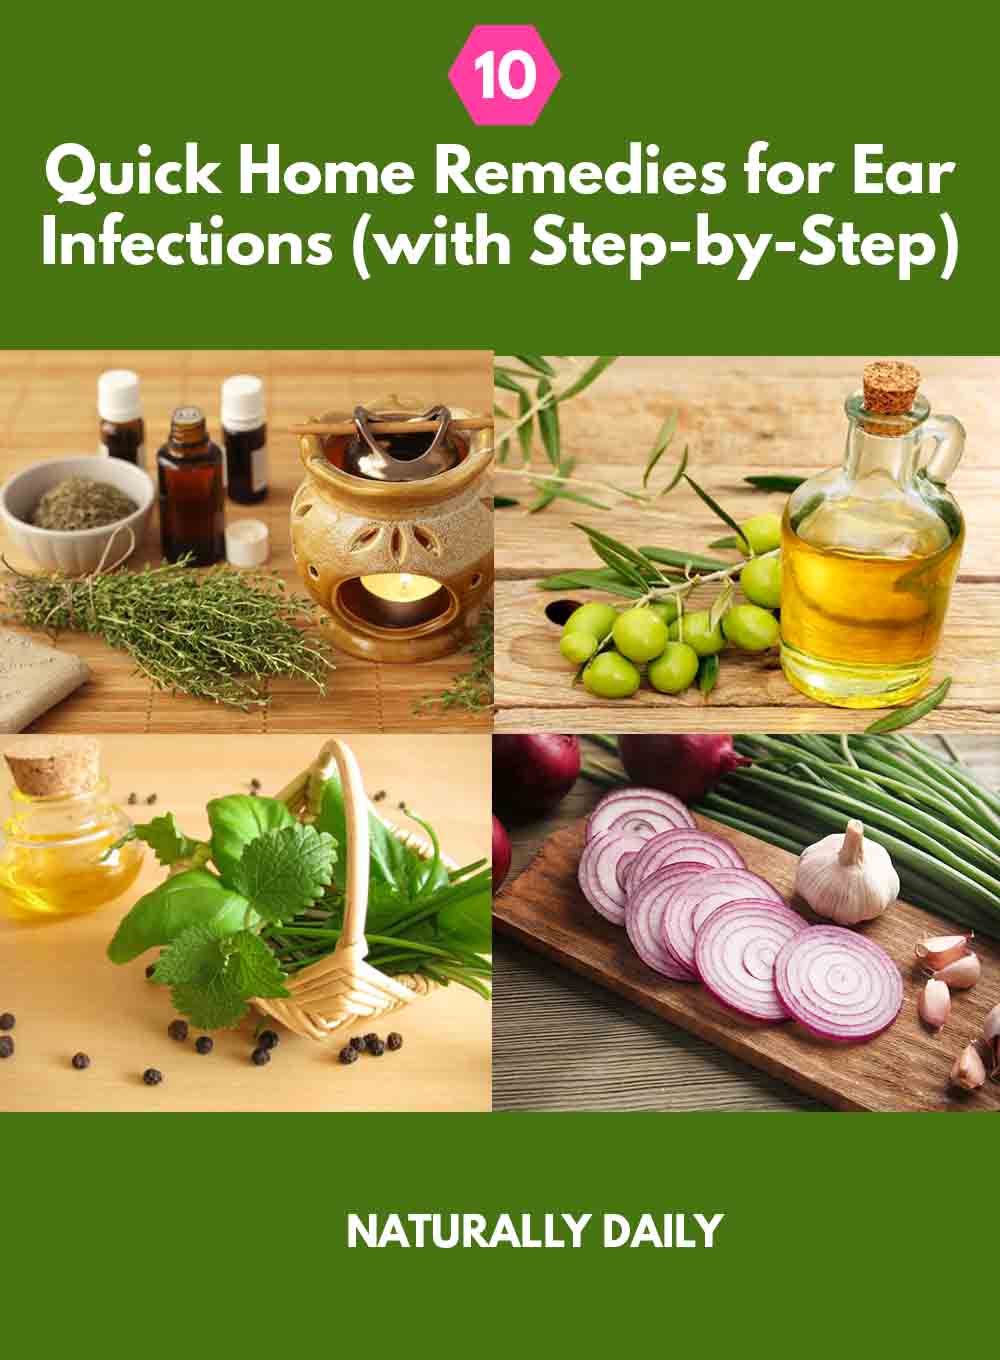 10 Quick Home Remedies for Ear Infections (with Step